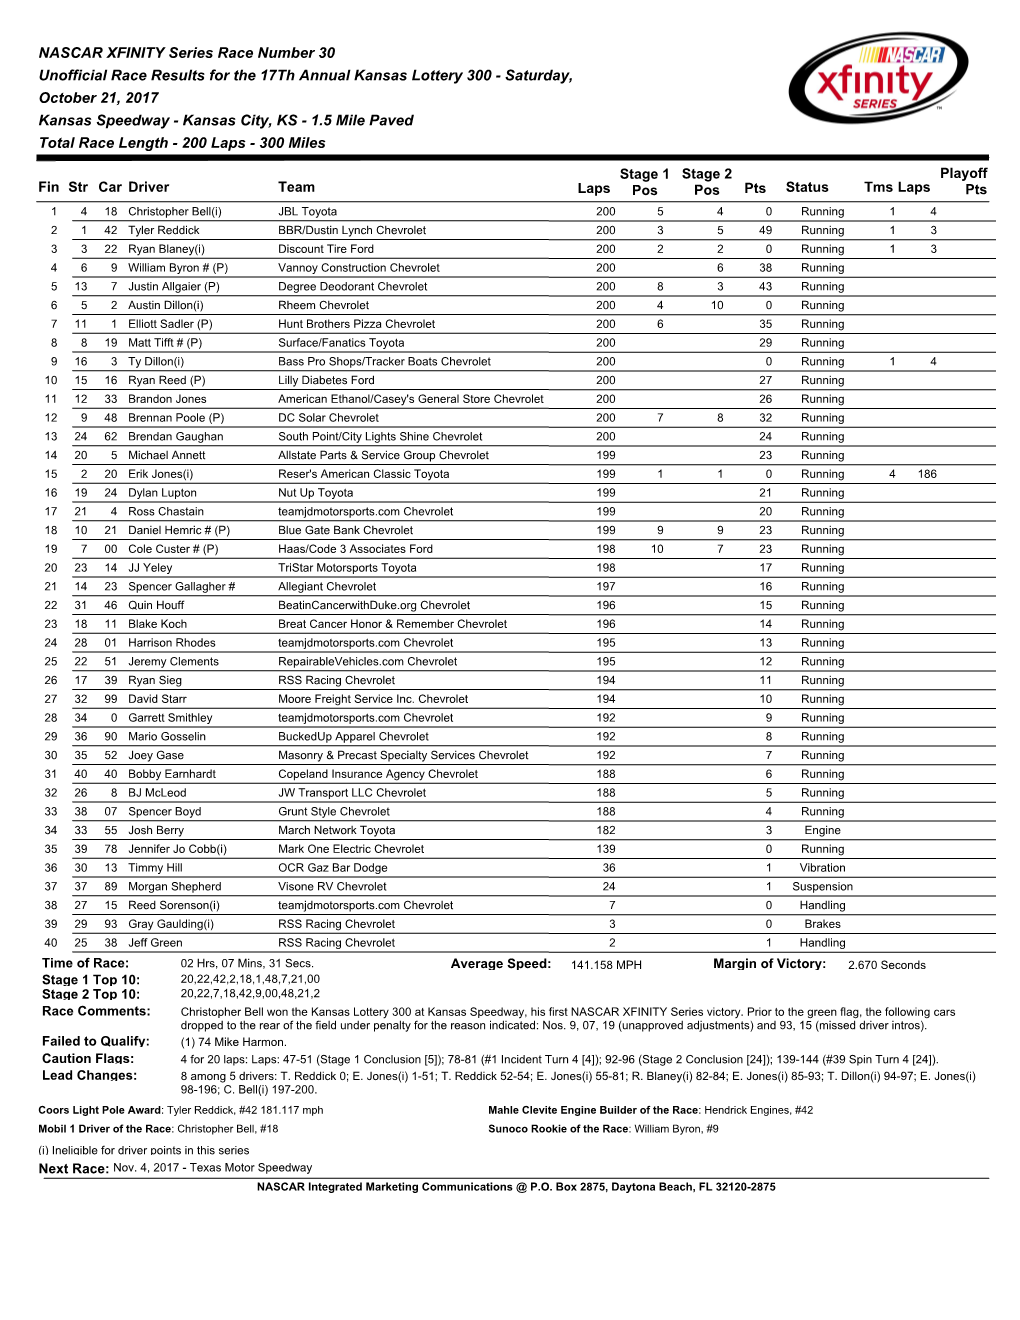 NASCAR XFINITY Series Race Number 30 Unofficial Race Results